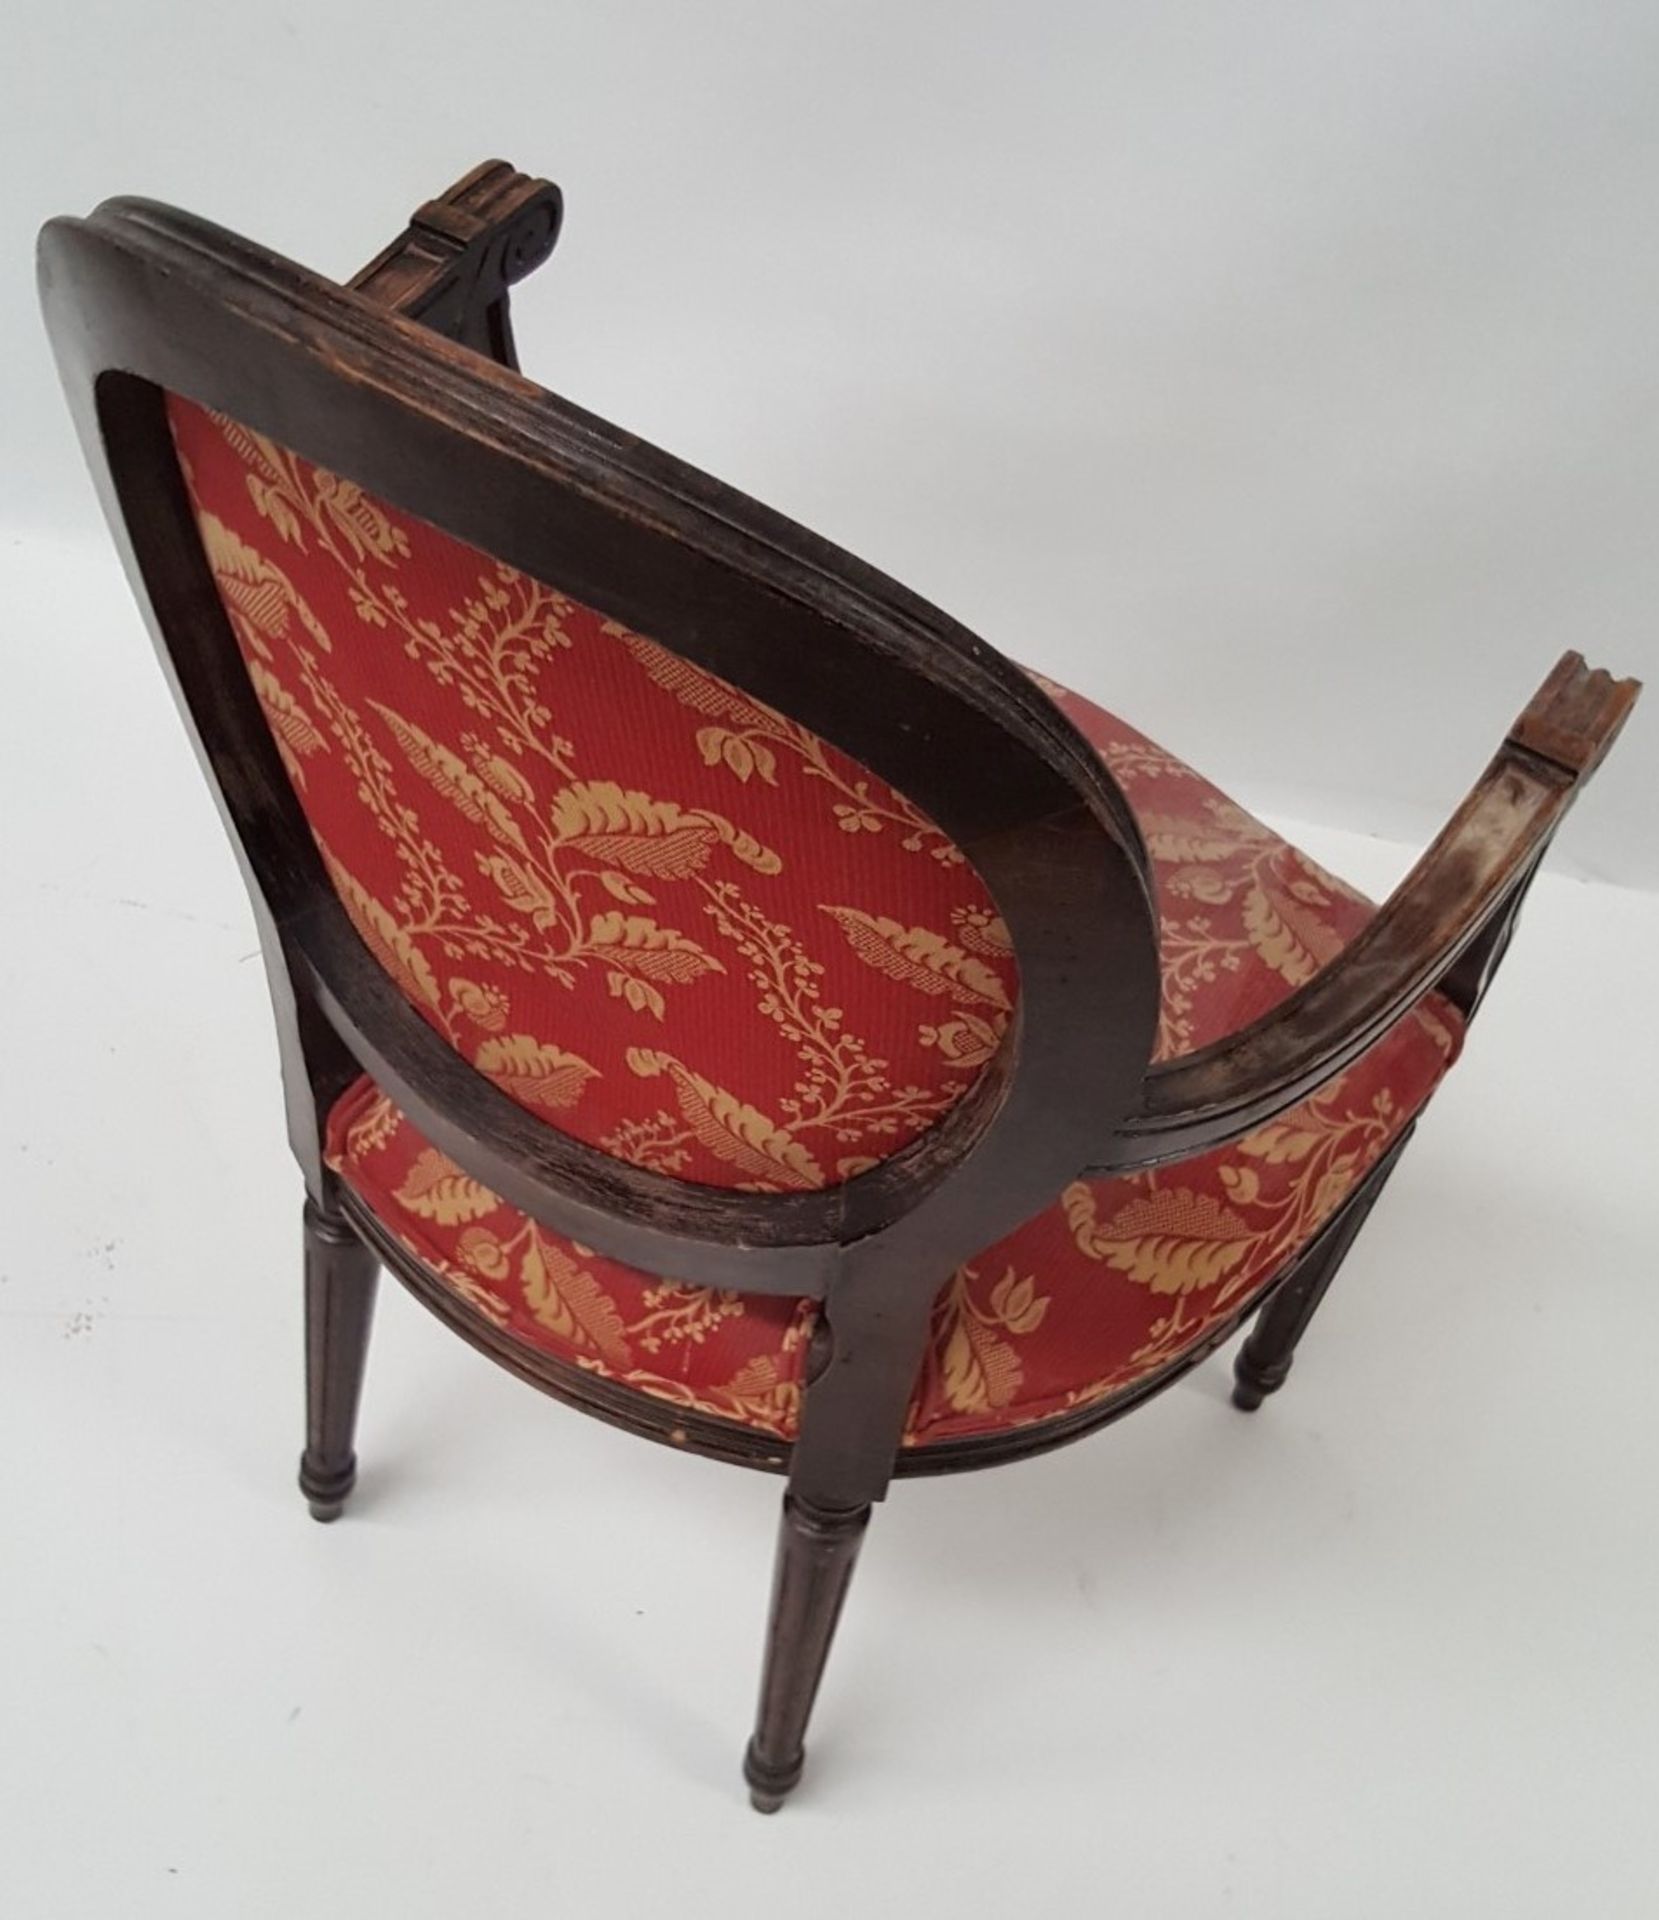 8 x Vintage Wooden Chairs Featuring Spindle Legs, And Upholstered In Red / Gold Floral Fabric - - Image 3 of 8